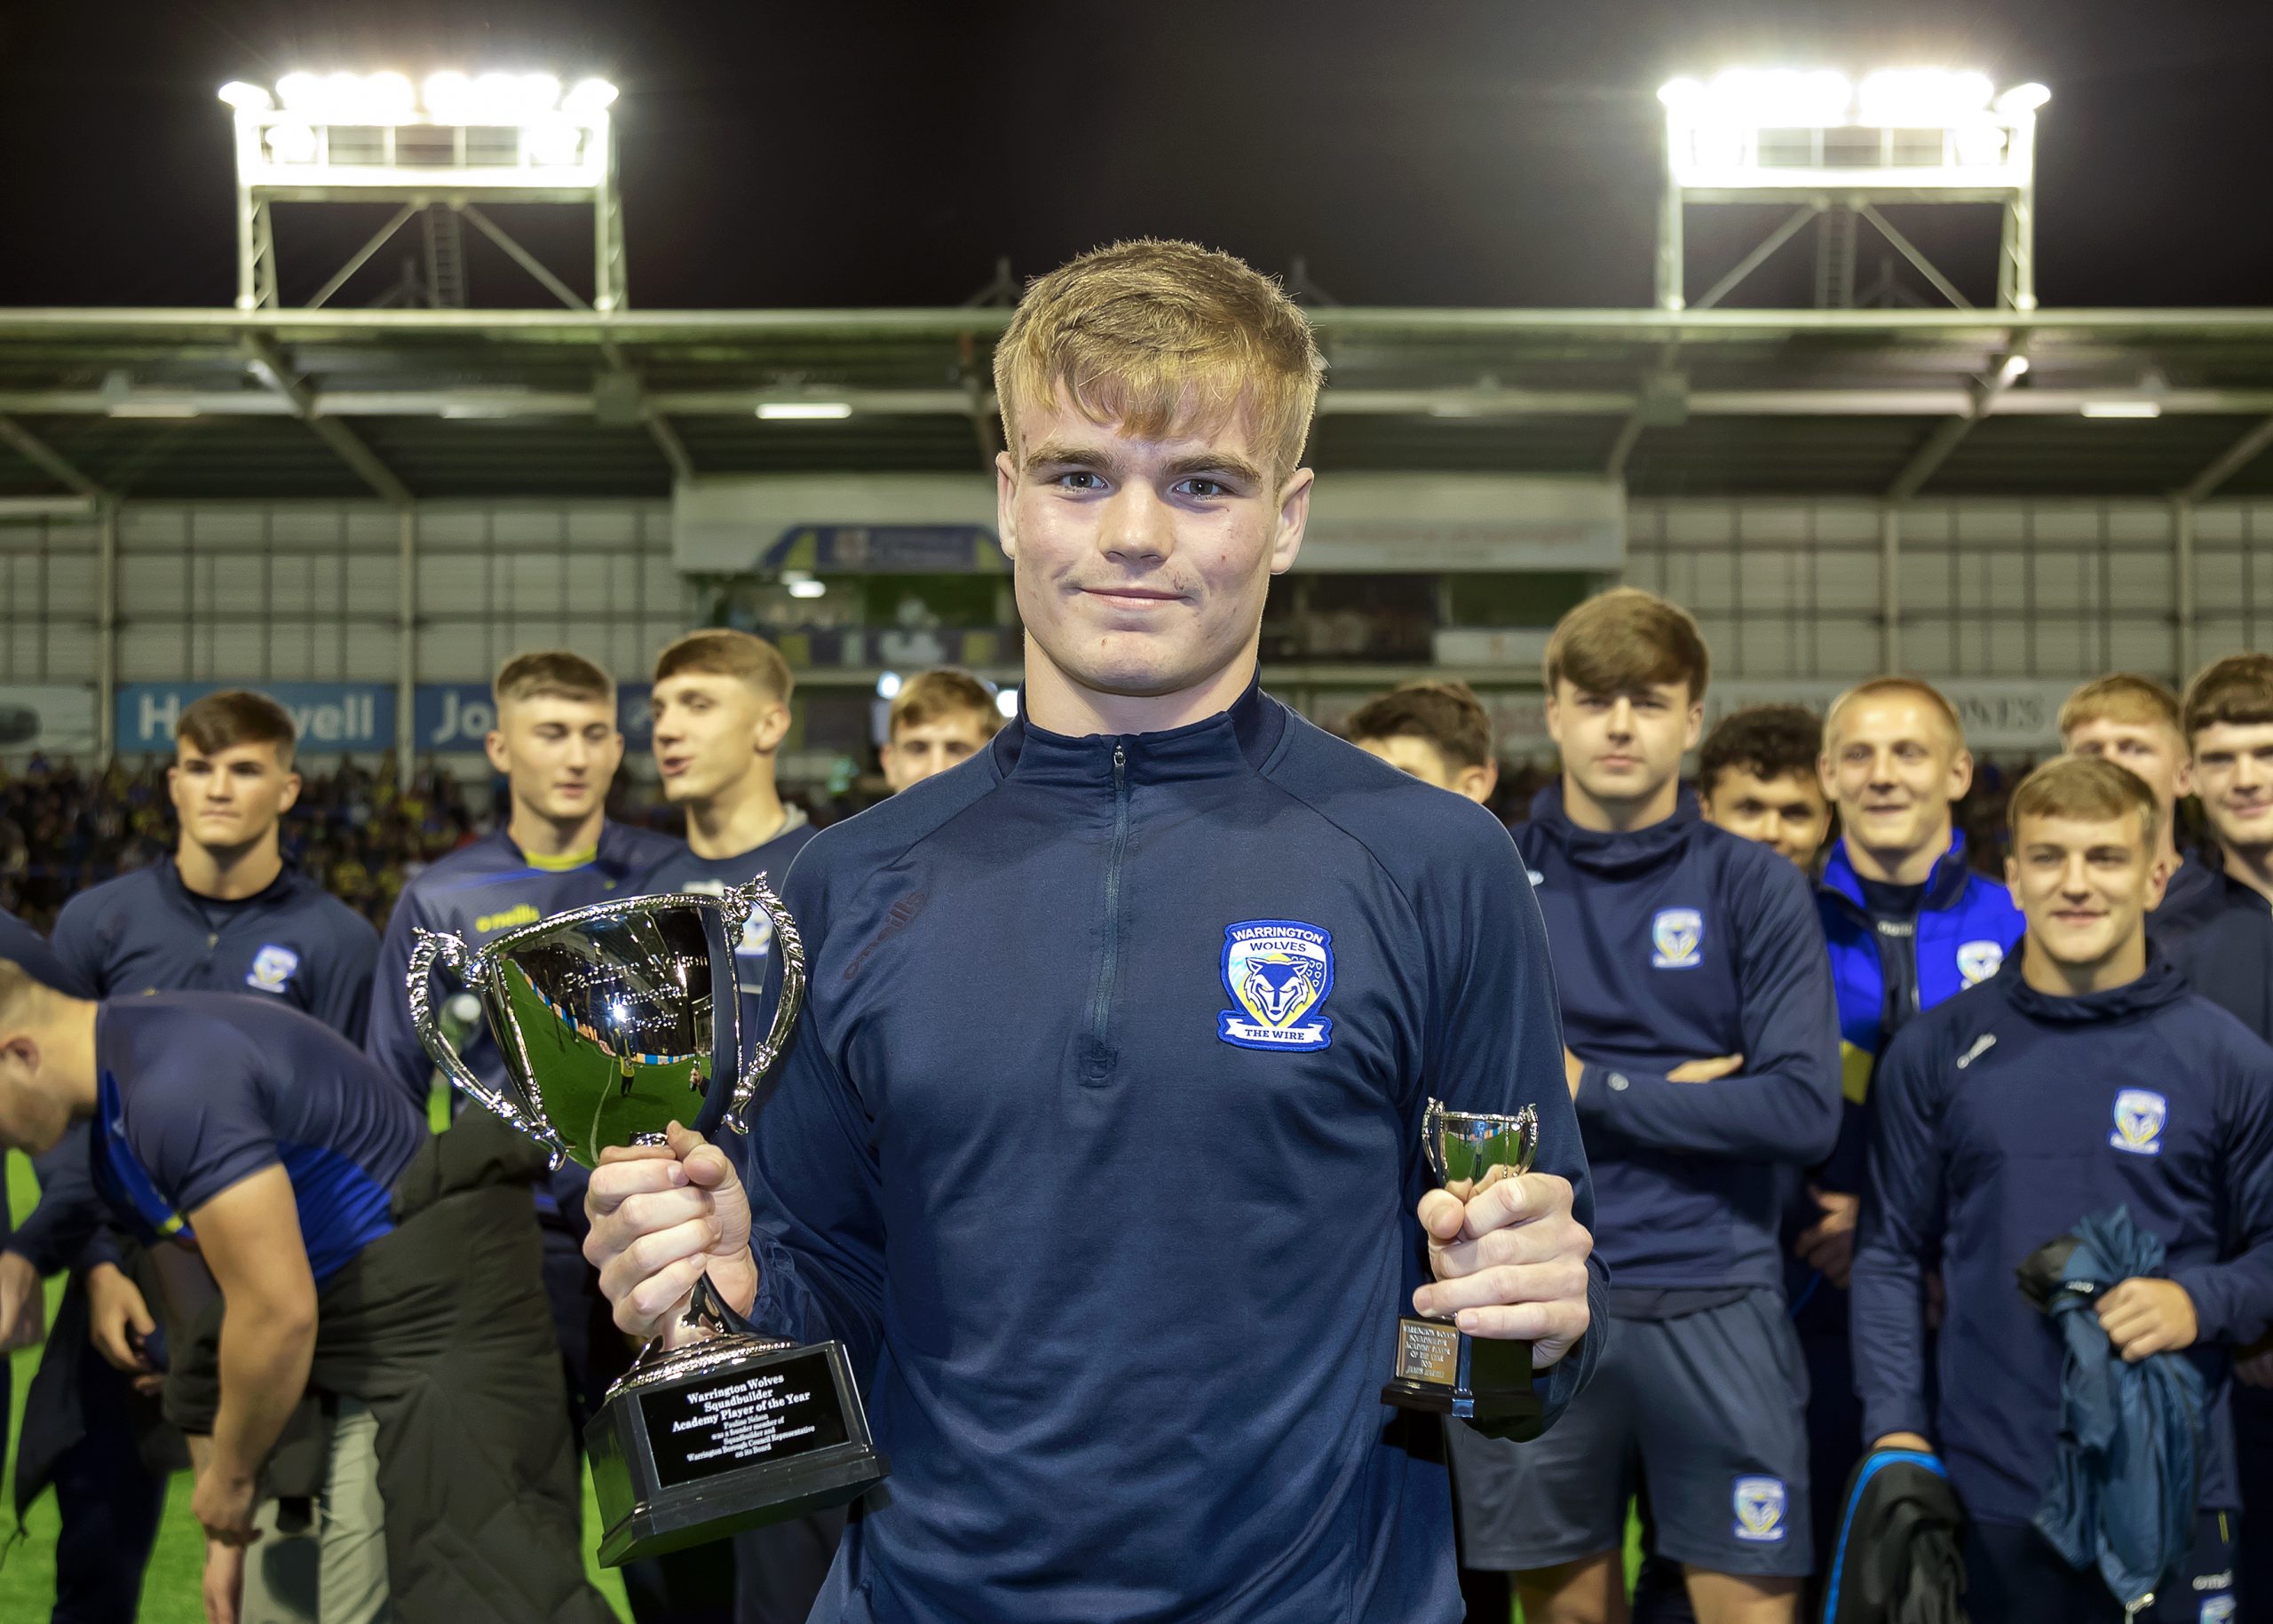 James Hartill Academy Player of the Year 2021